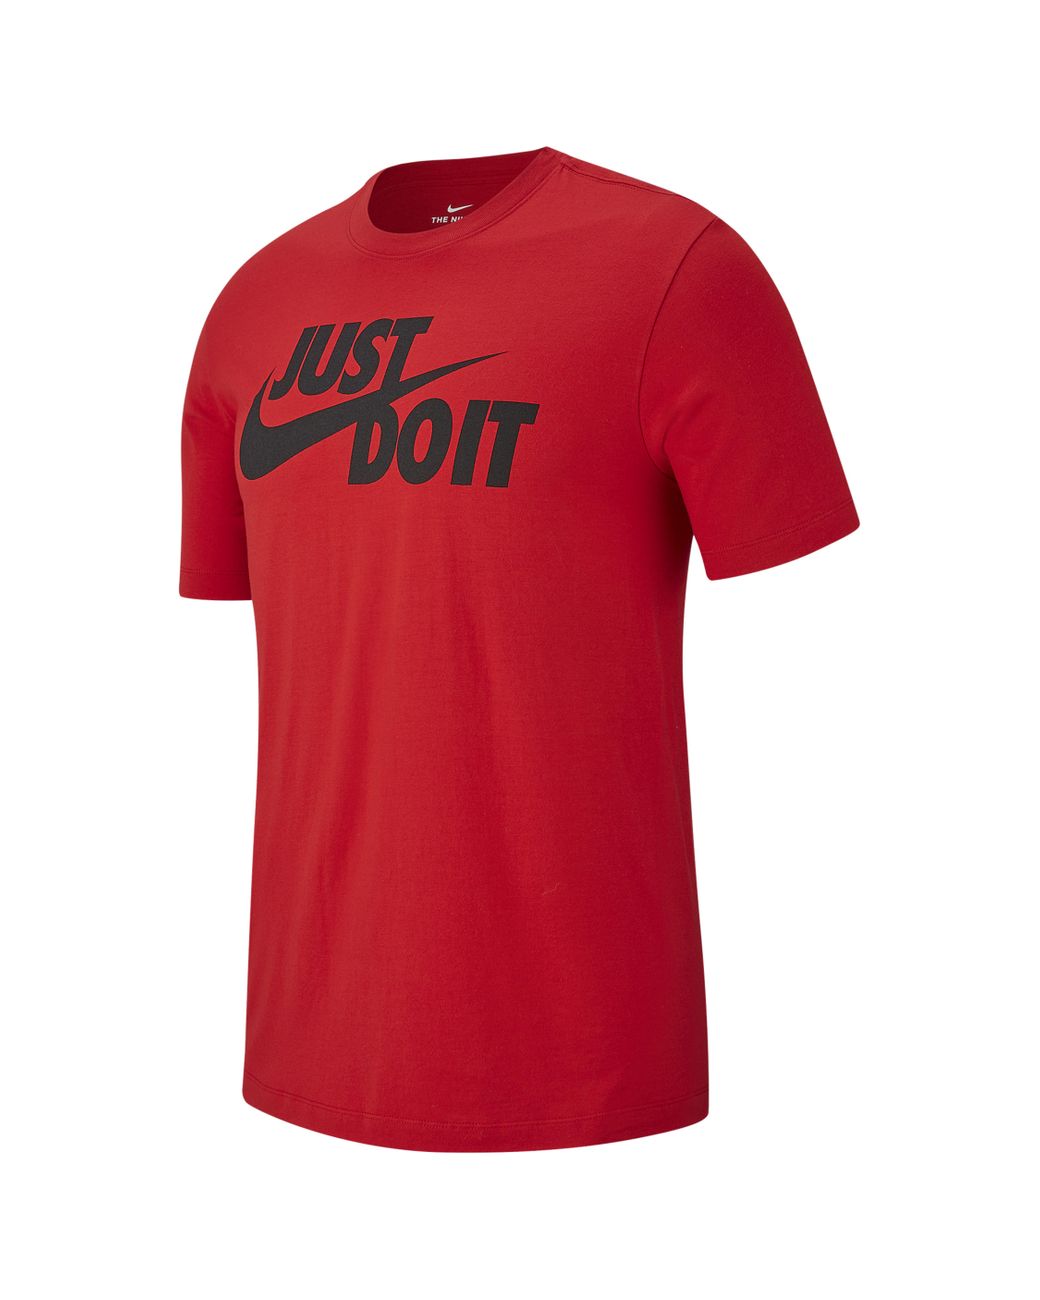 Nike Cotton Just Do It Swoosh T-shirt in University Red/Black (Red) for ...